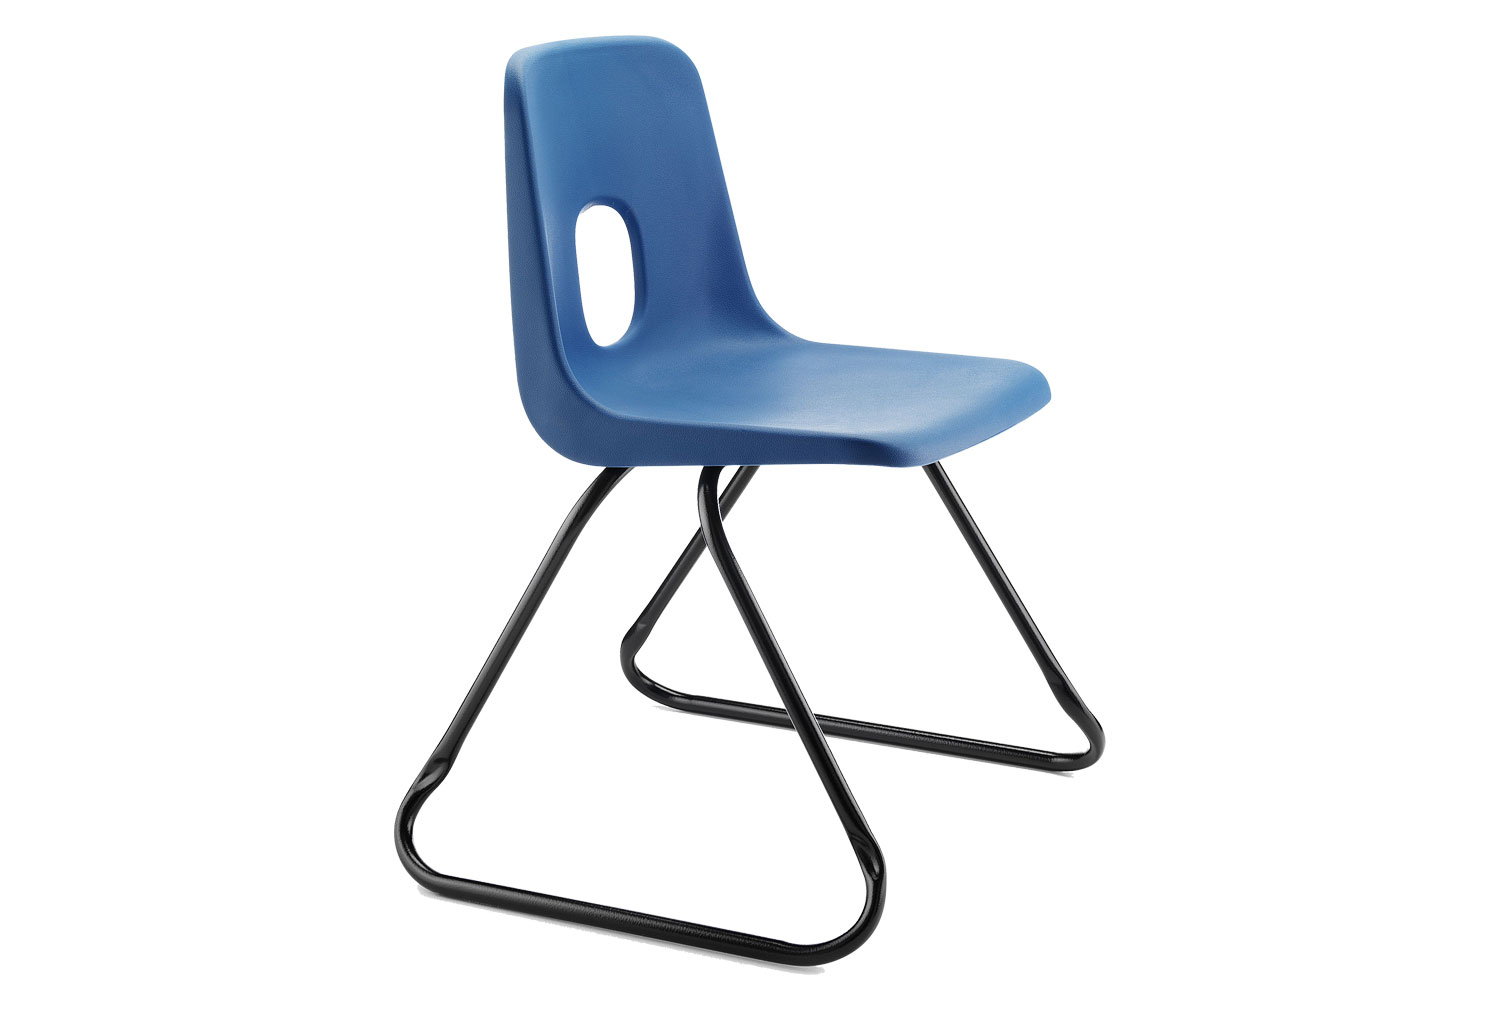 Qty 8 - Hille E Series Skid Base Classroom Chair, 14+ Years - 41wx37dx46h (cm), Black Frame, Blue